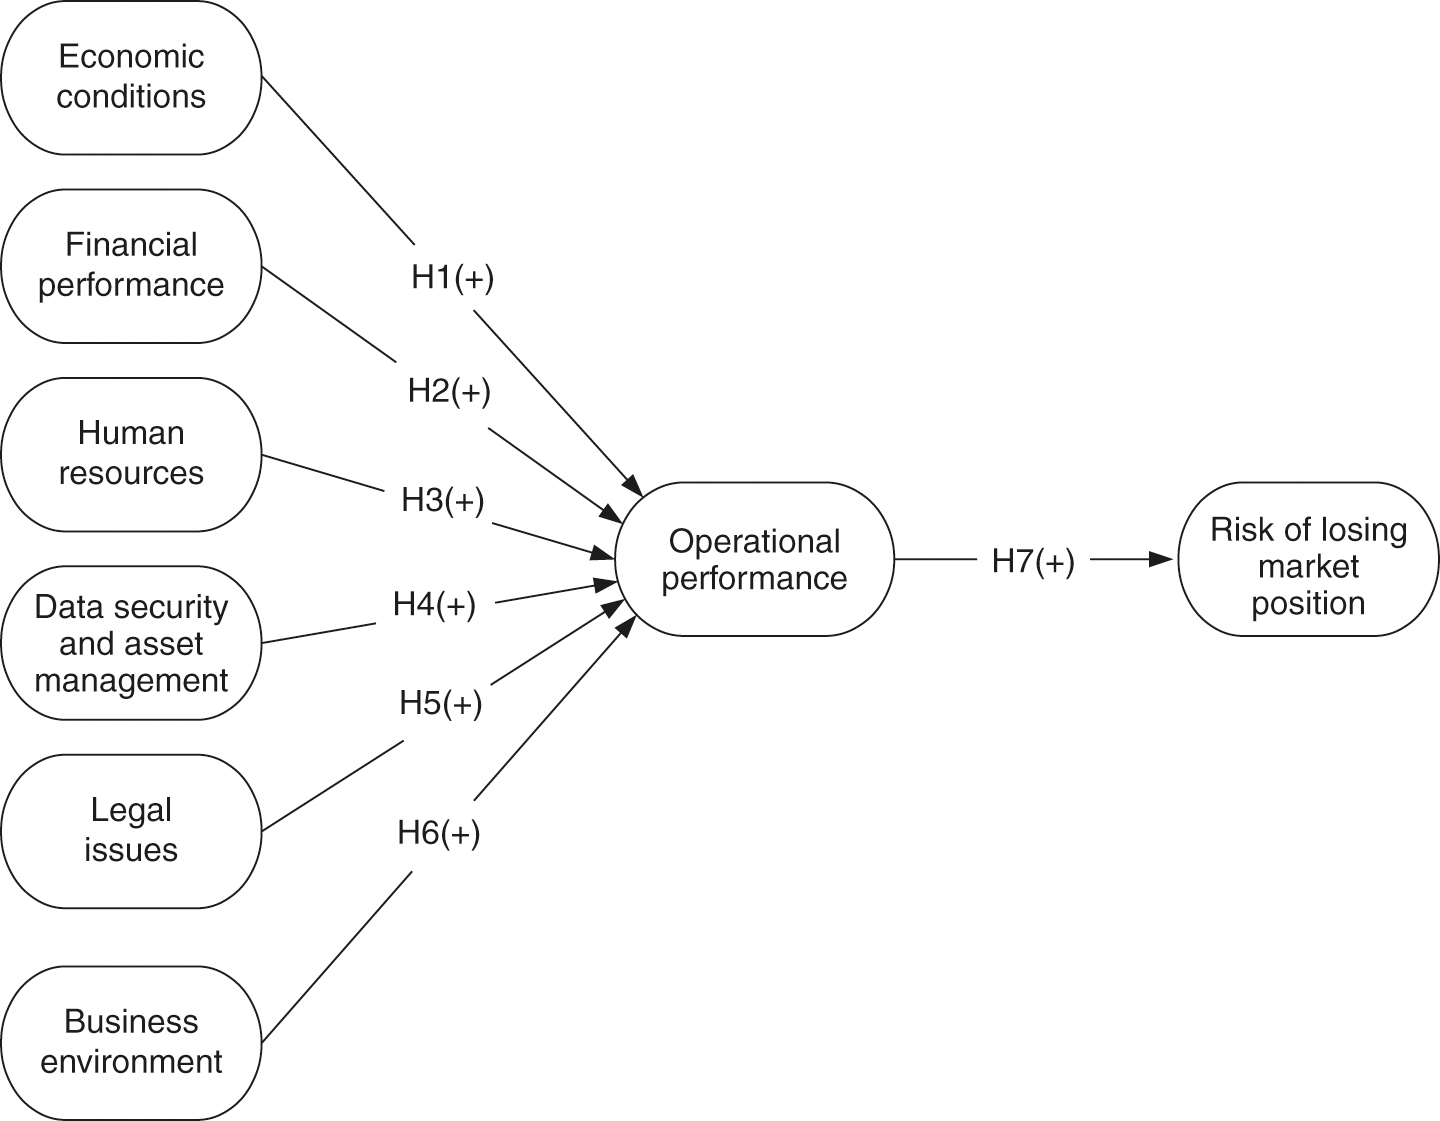 A theoretical model for examining the influence of various sources of business risk on operational performance and the risk of Serbian companies losing their market position.